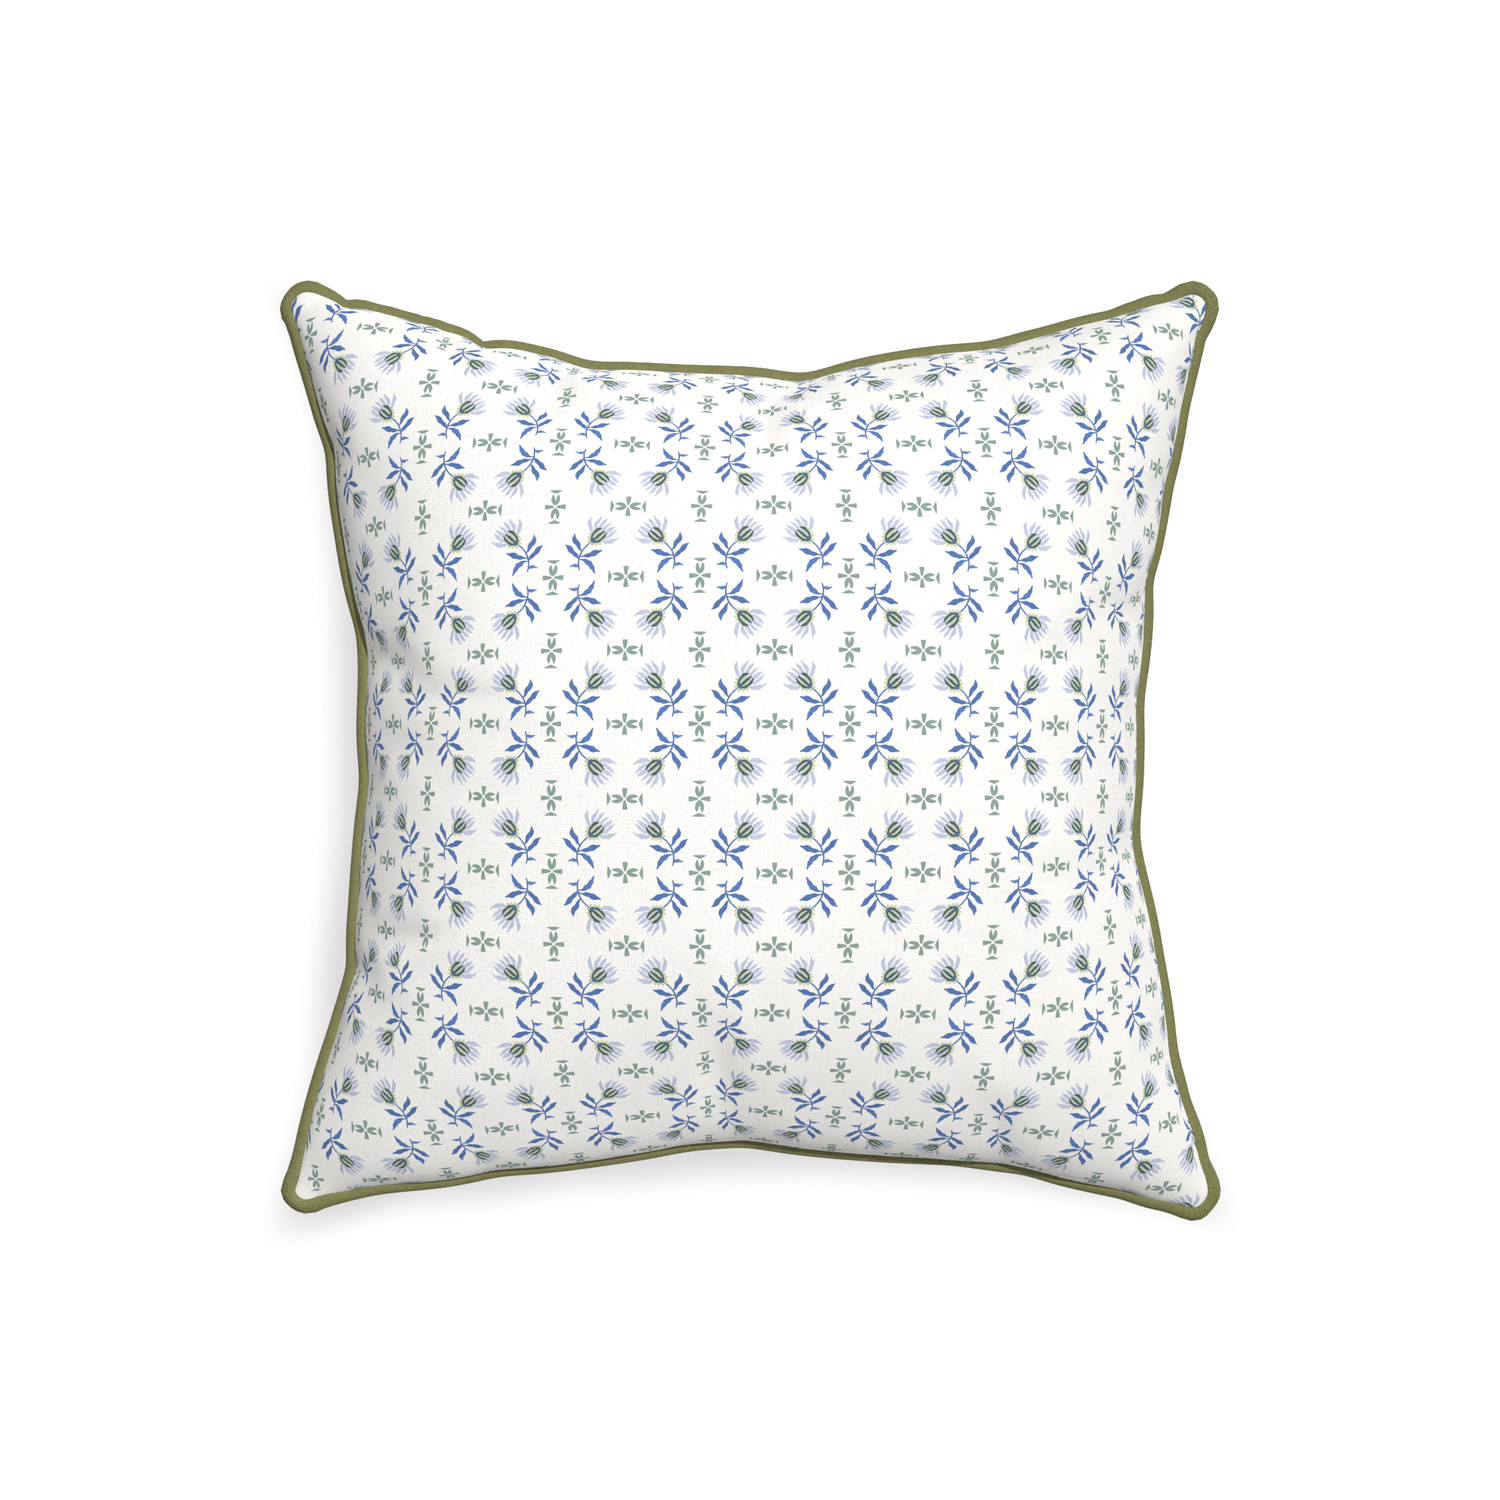 20-square lee custom pillow with moss piping on white background